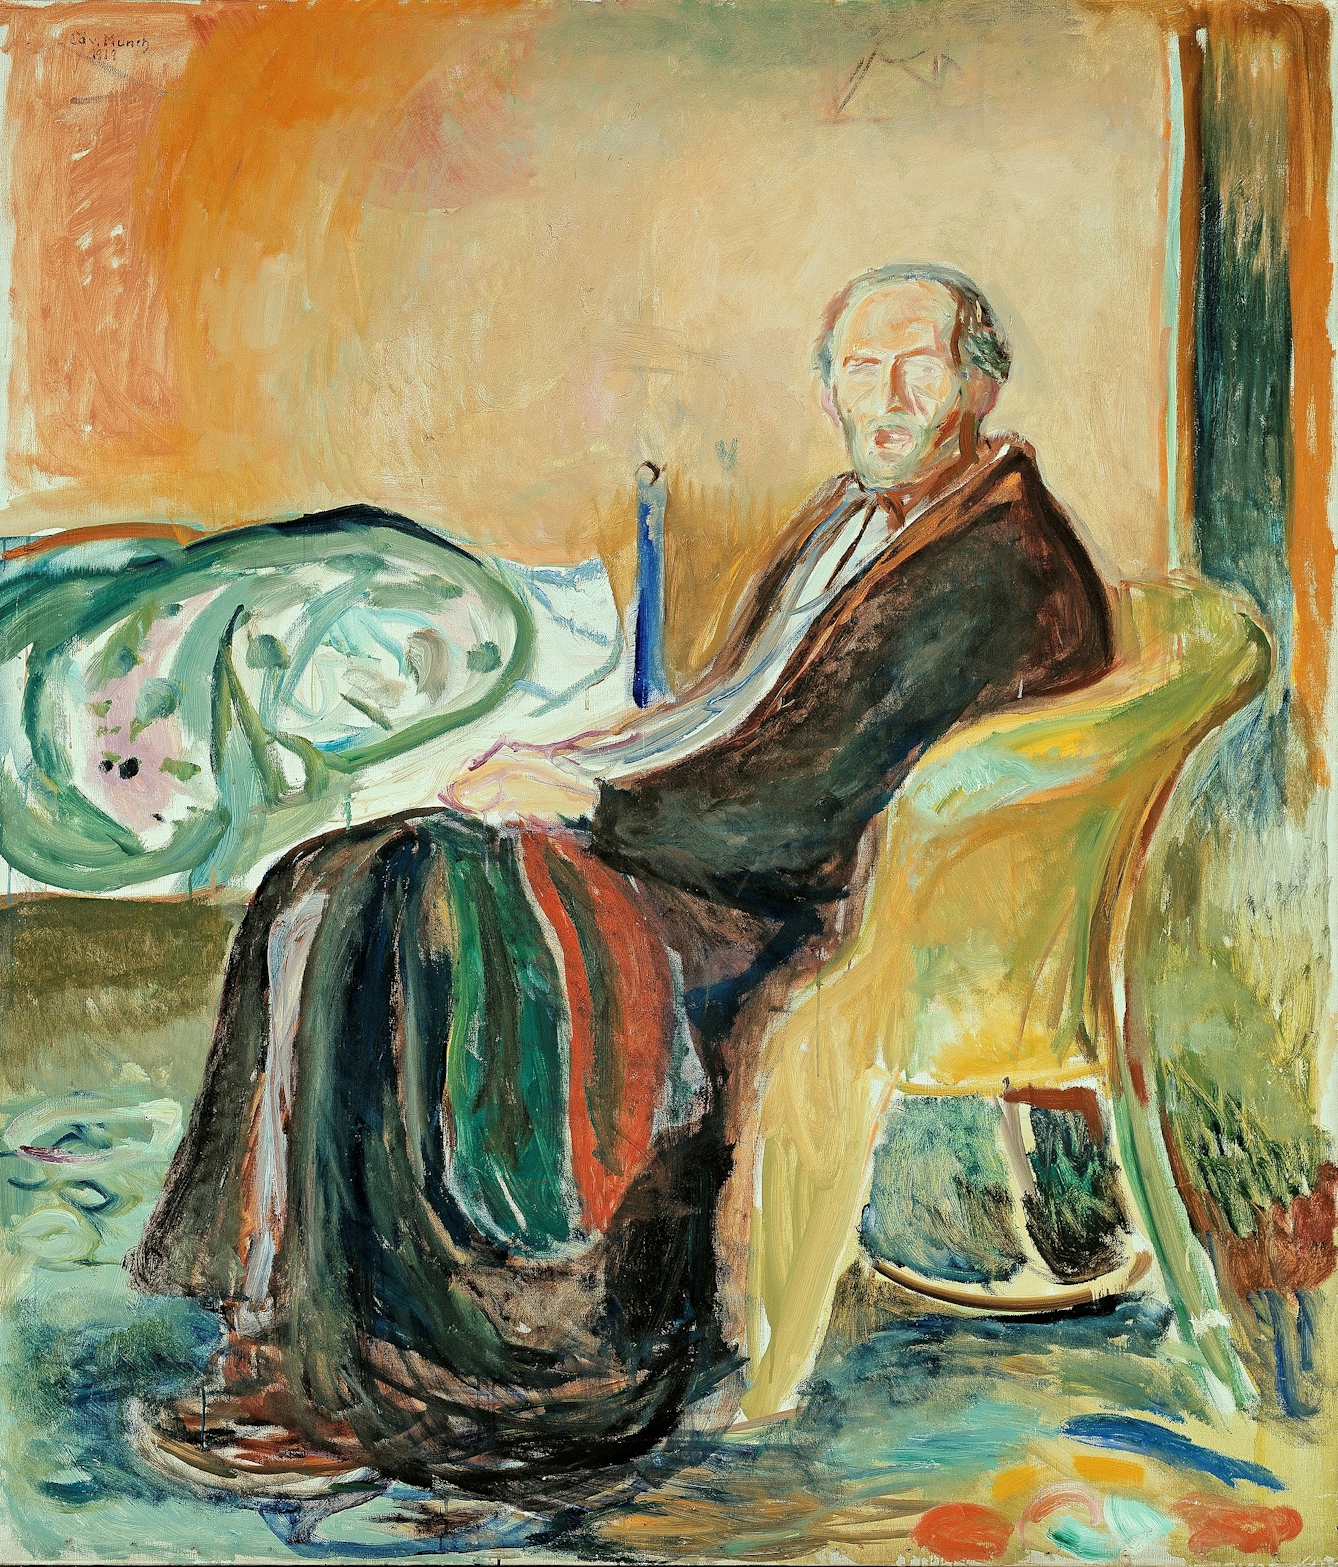 A self-portrait of Edvard Munch sitting in a chair with his bed in the background. 